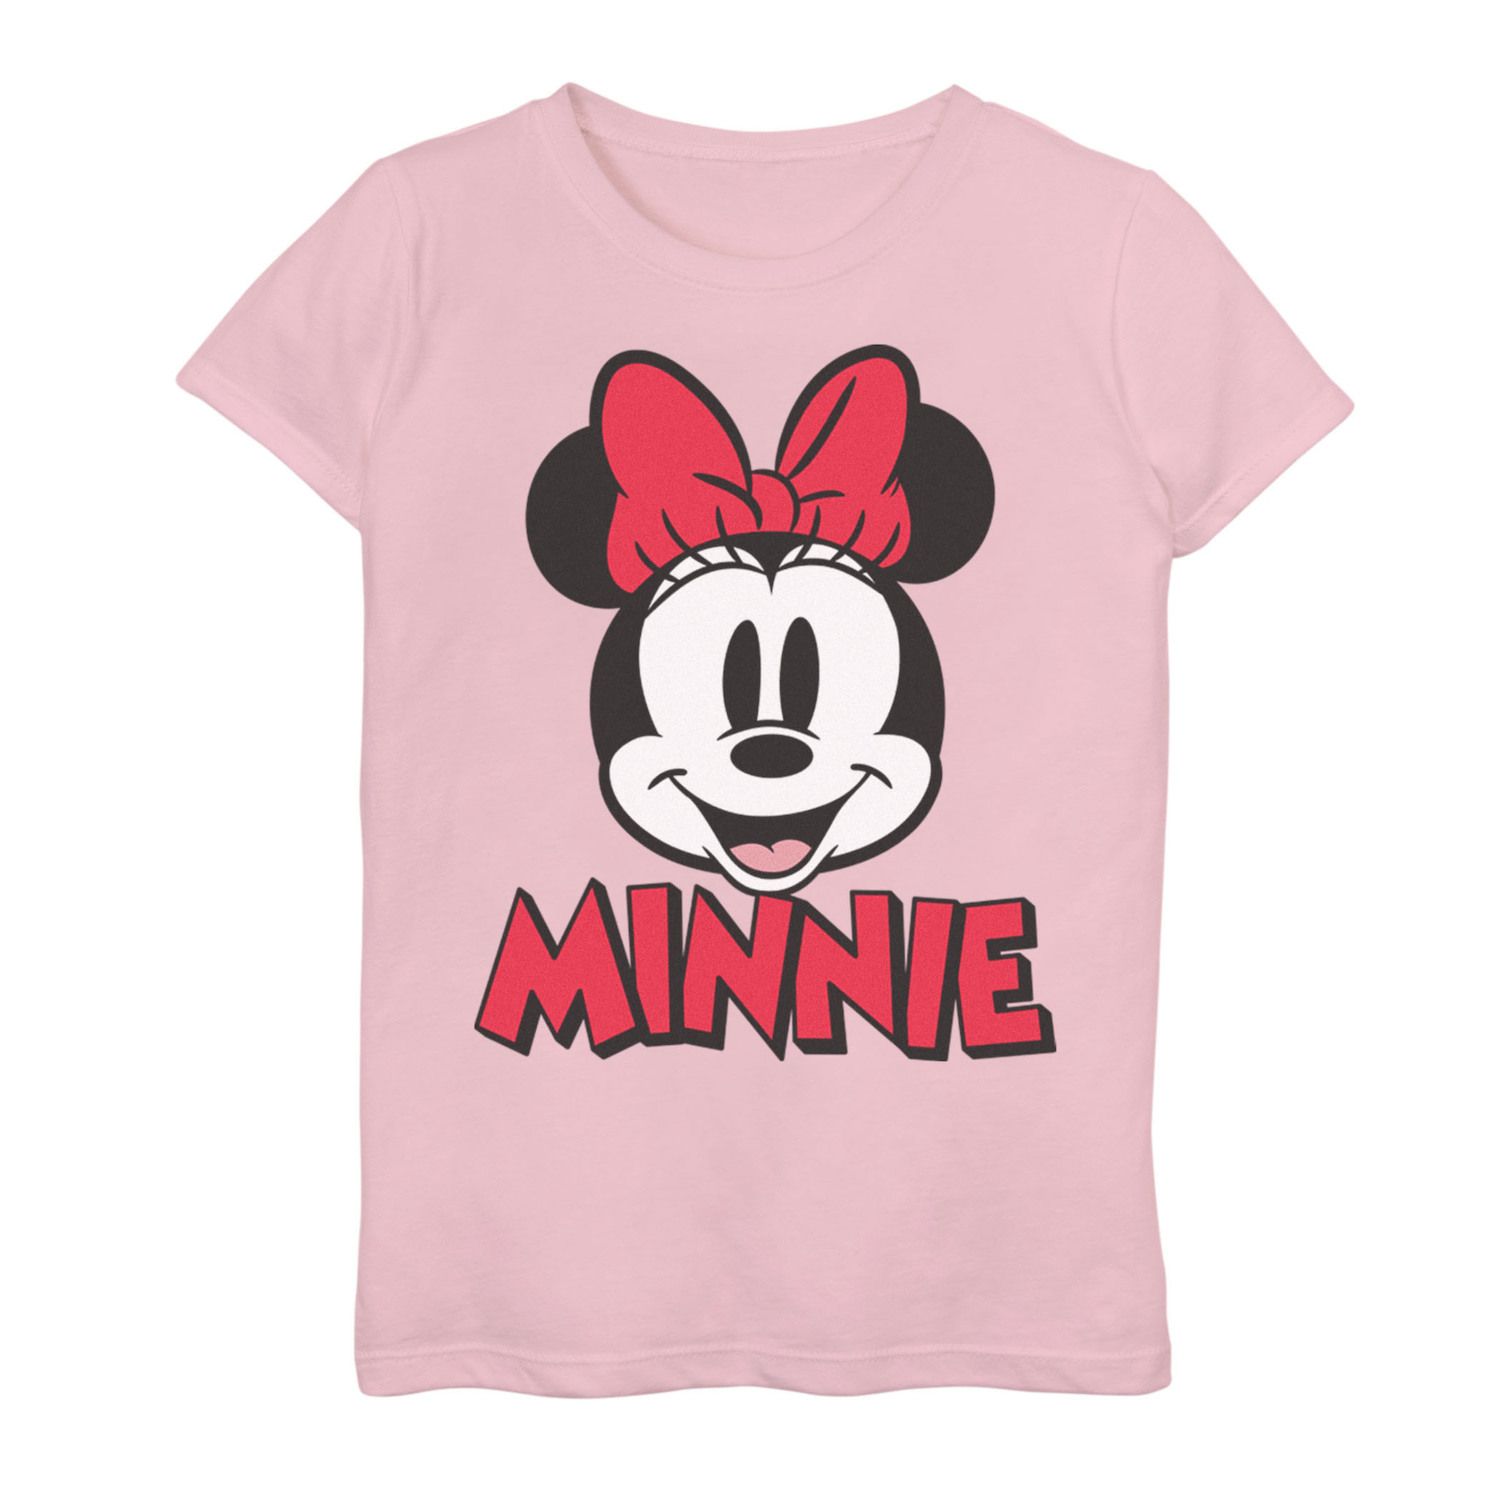 Image for Disney s Mickey Mouse & Friends Girls 7-16 Minnie Mouse Classic Portrait Graphic Tee at Kohl's.